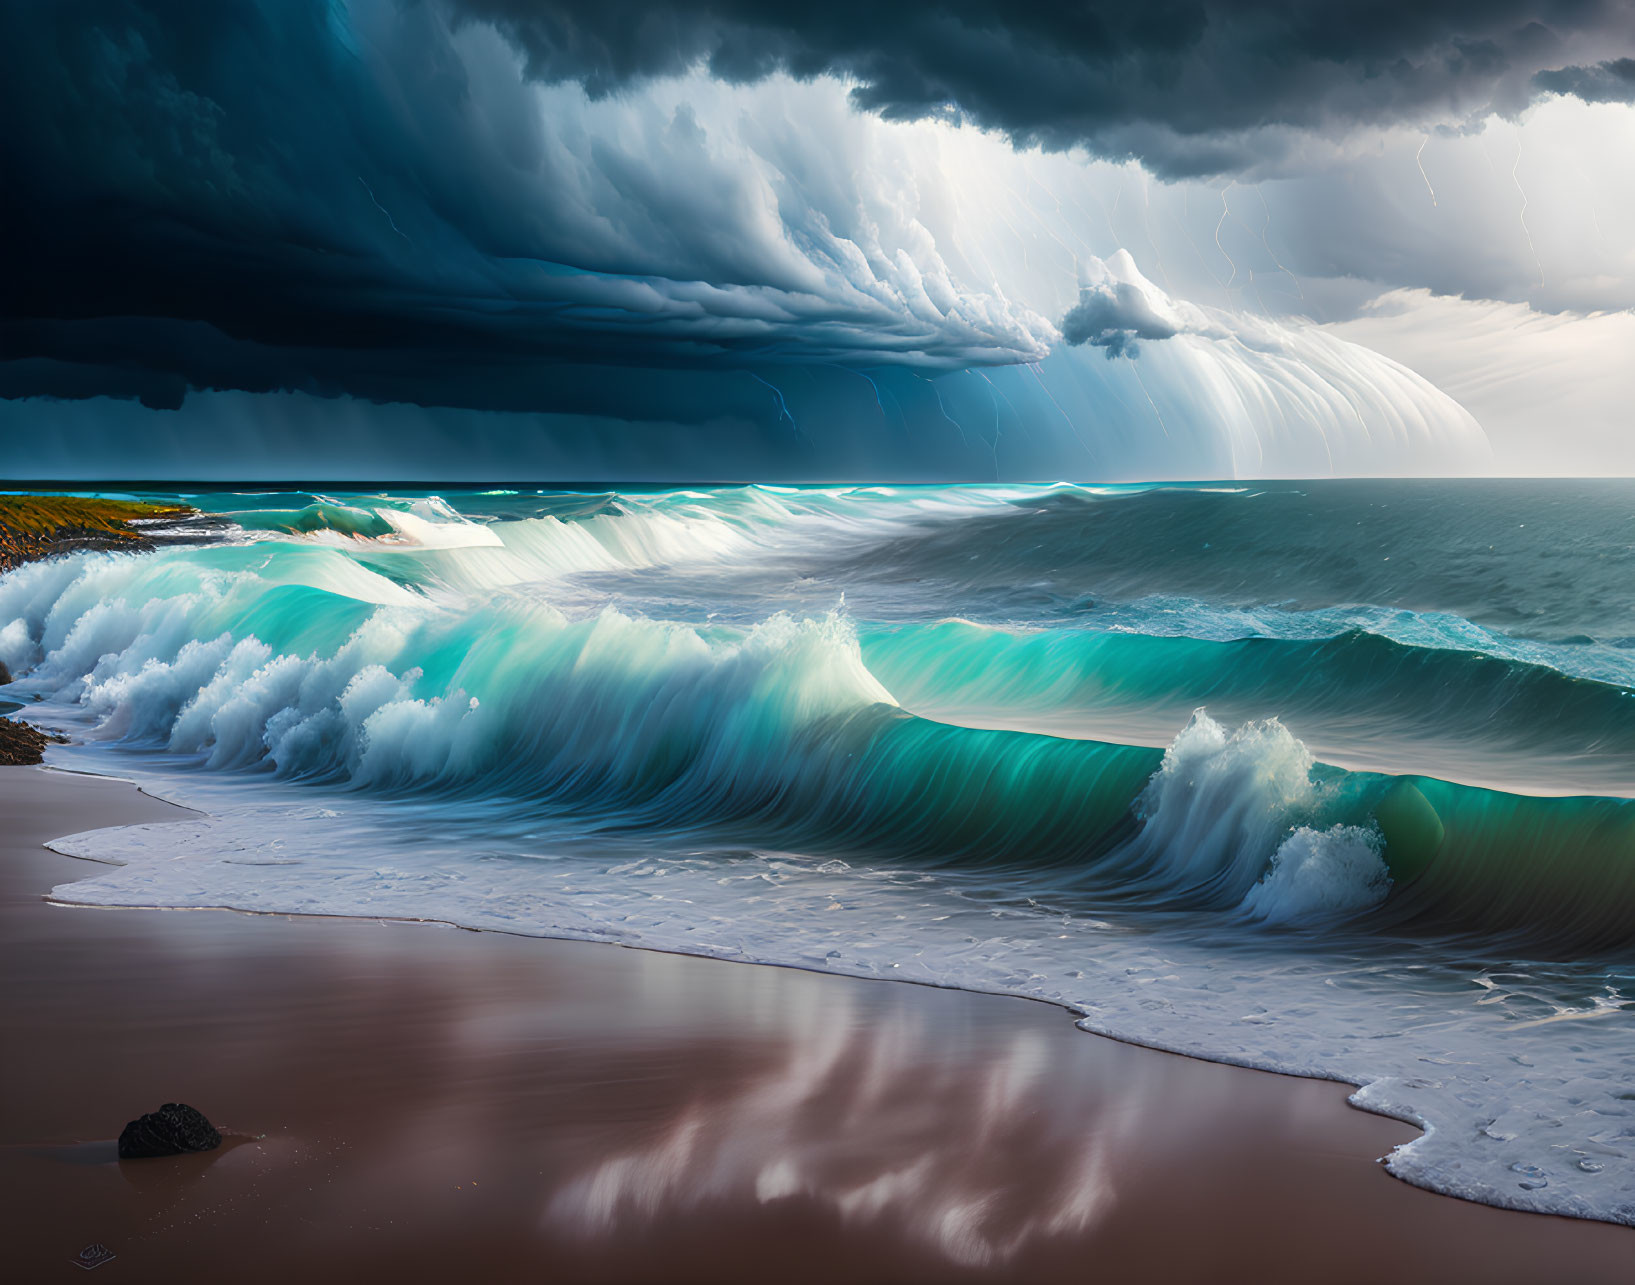 Stormy Beachscape with Turquoise Waves and Lightning Sky